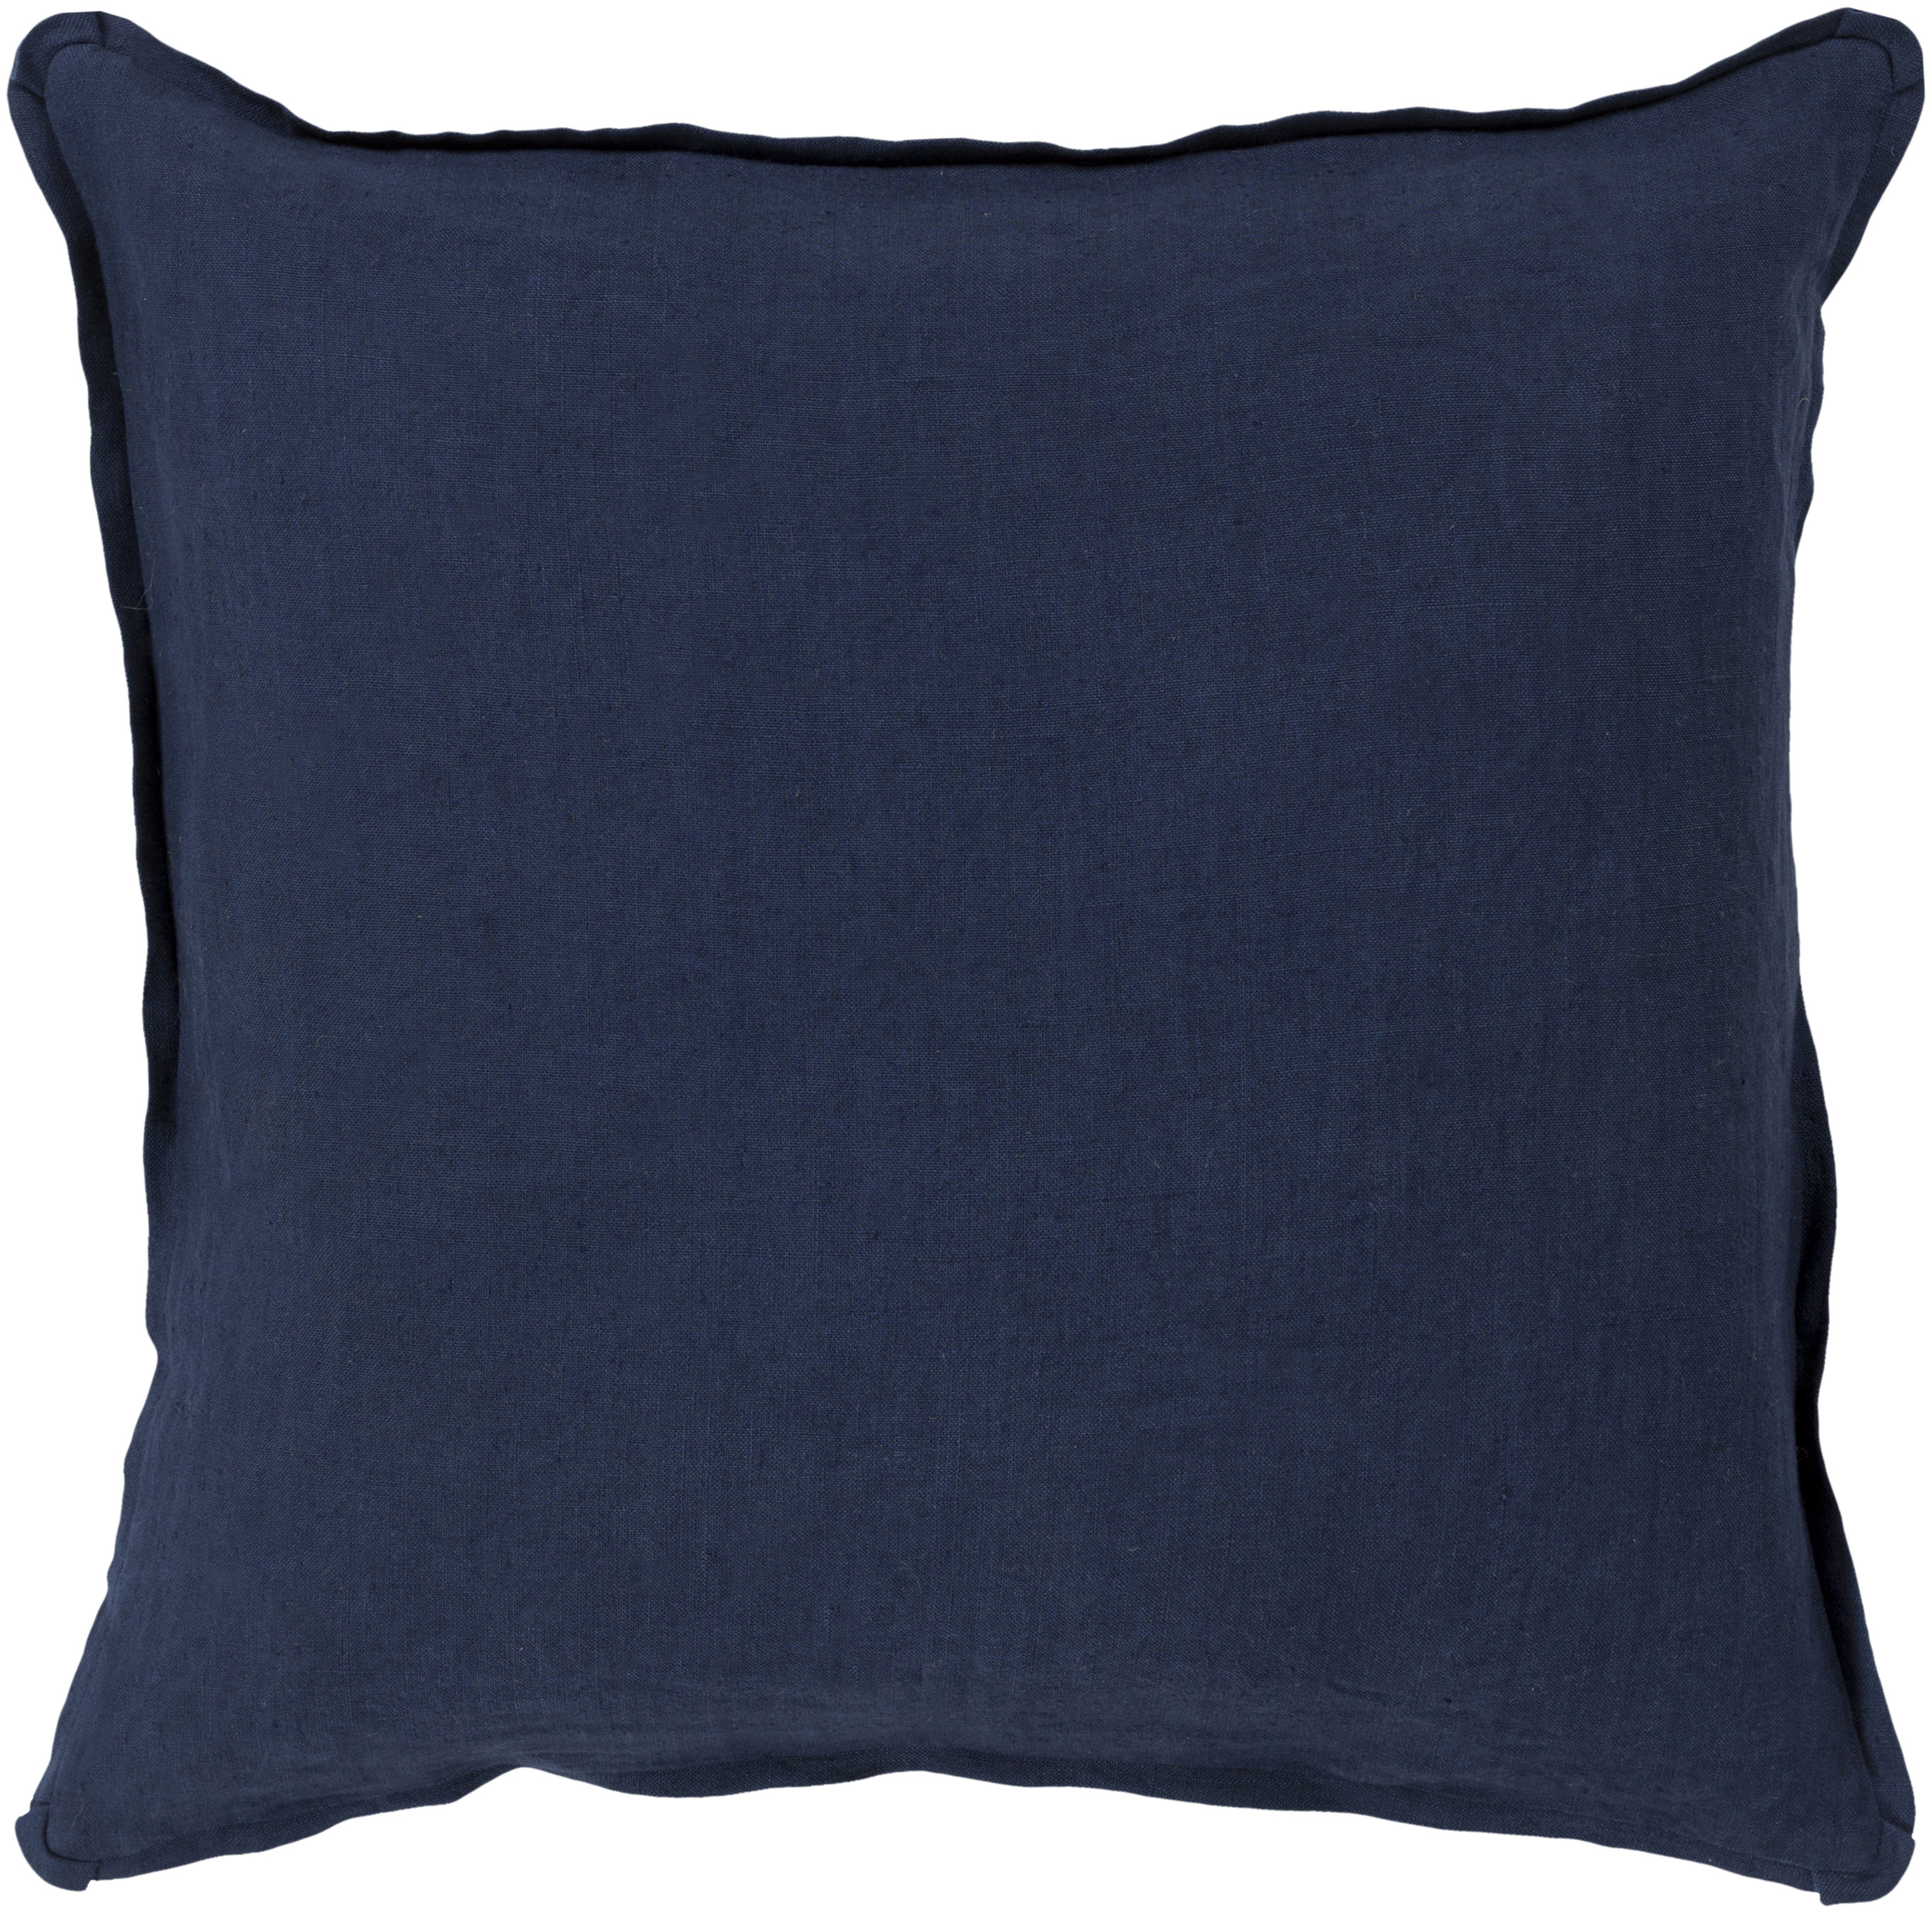 Solid Pillow - Navy - with Polyester Insert - Surya